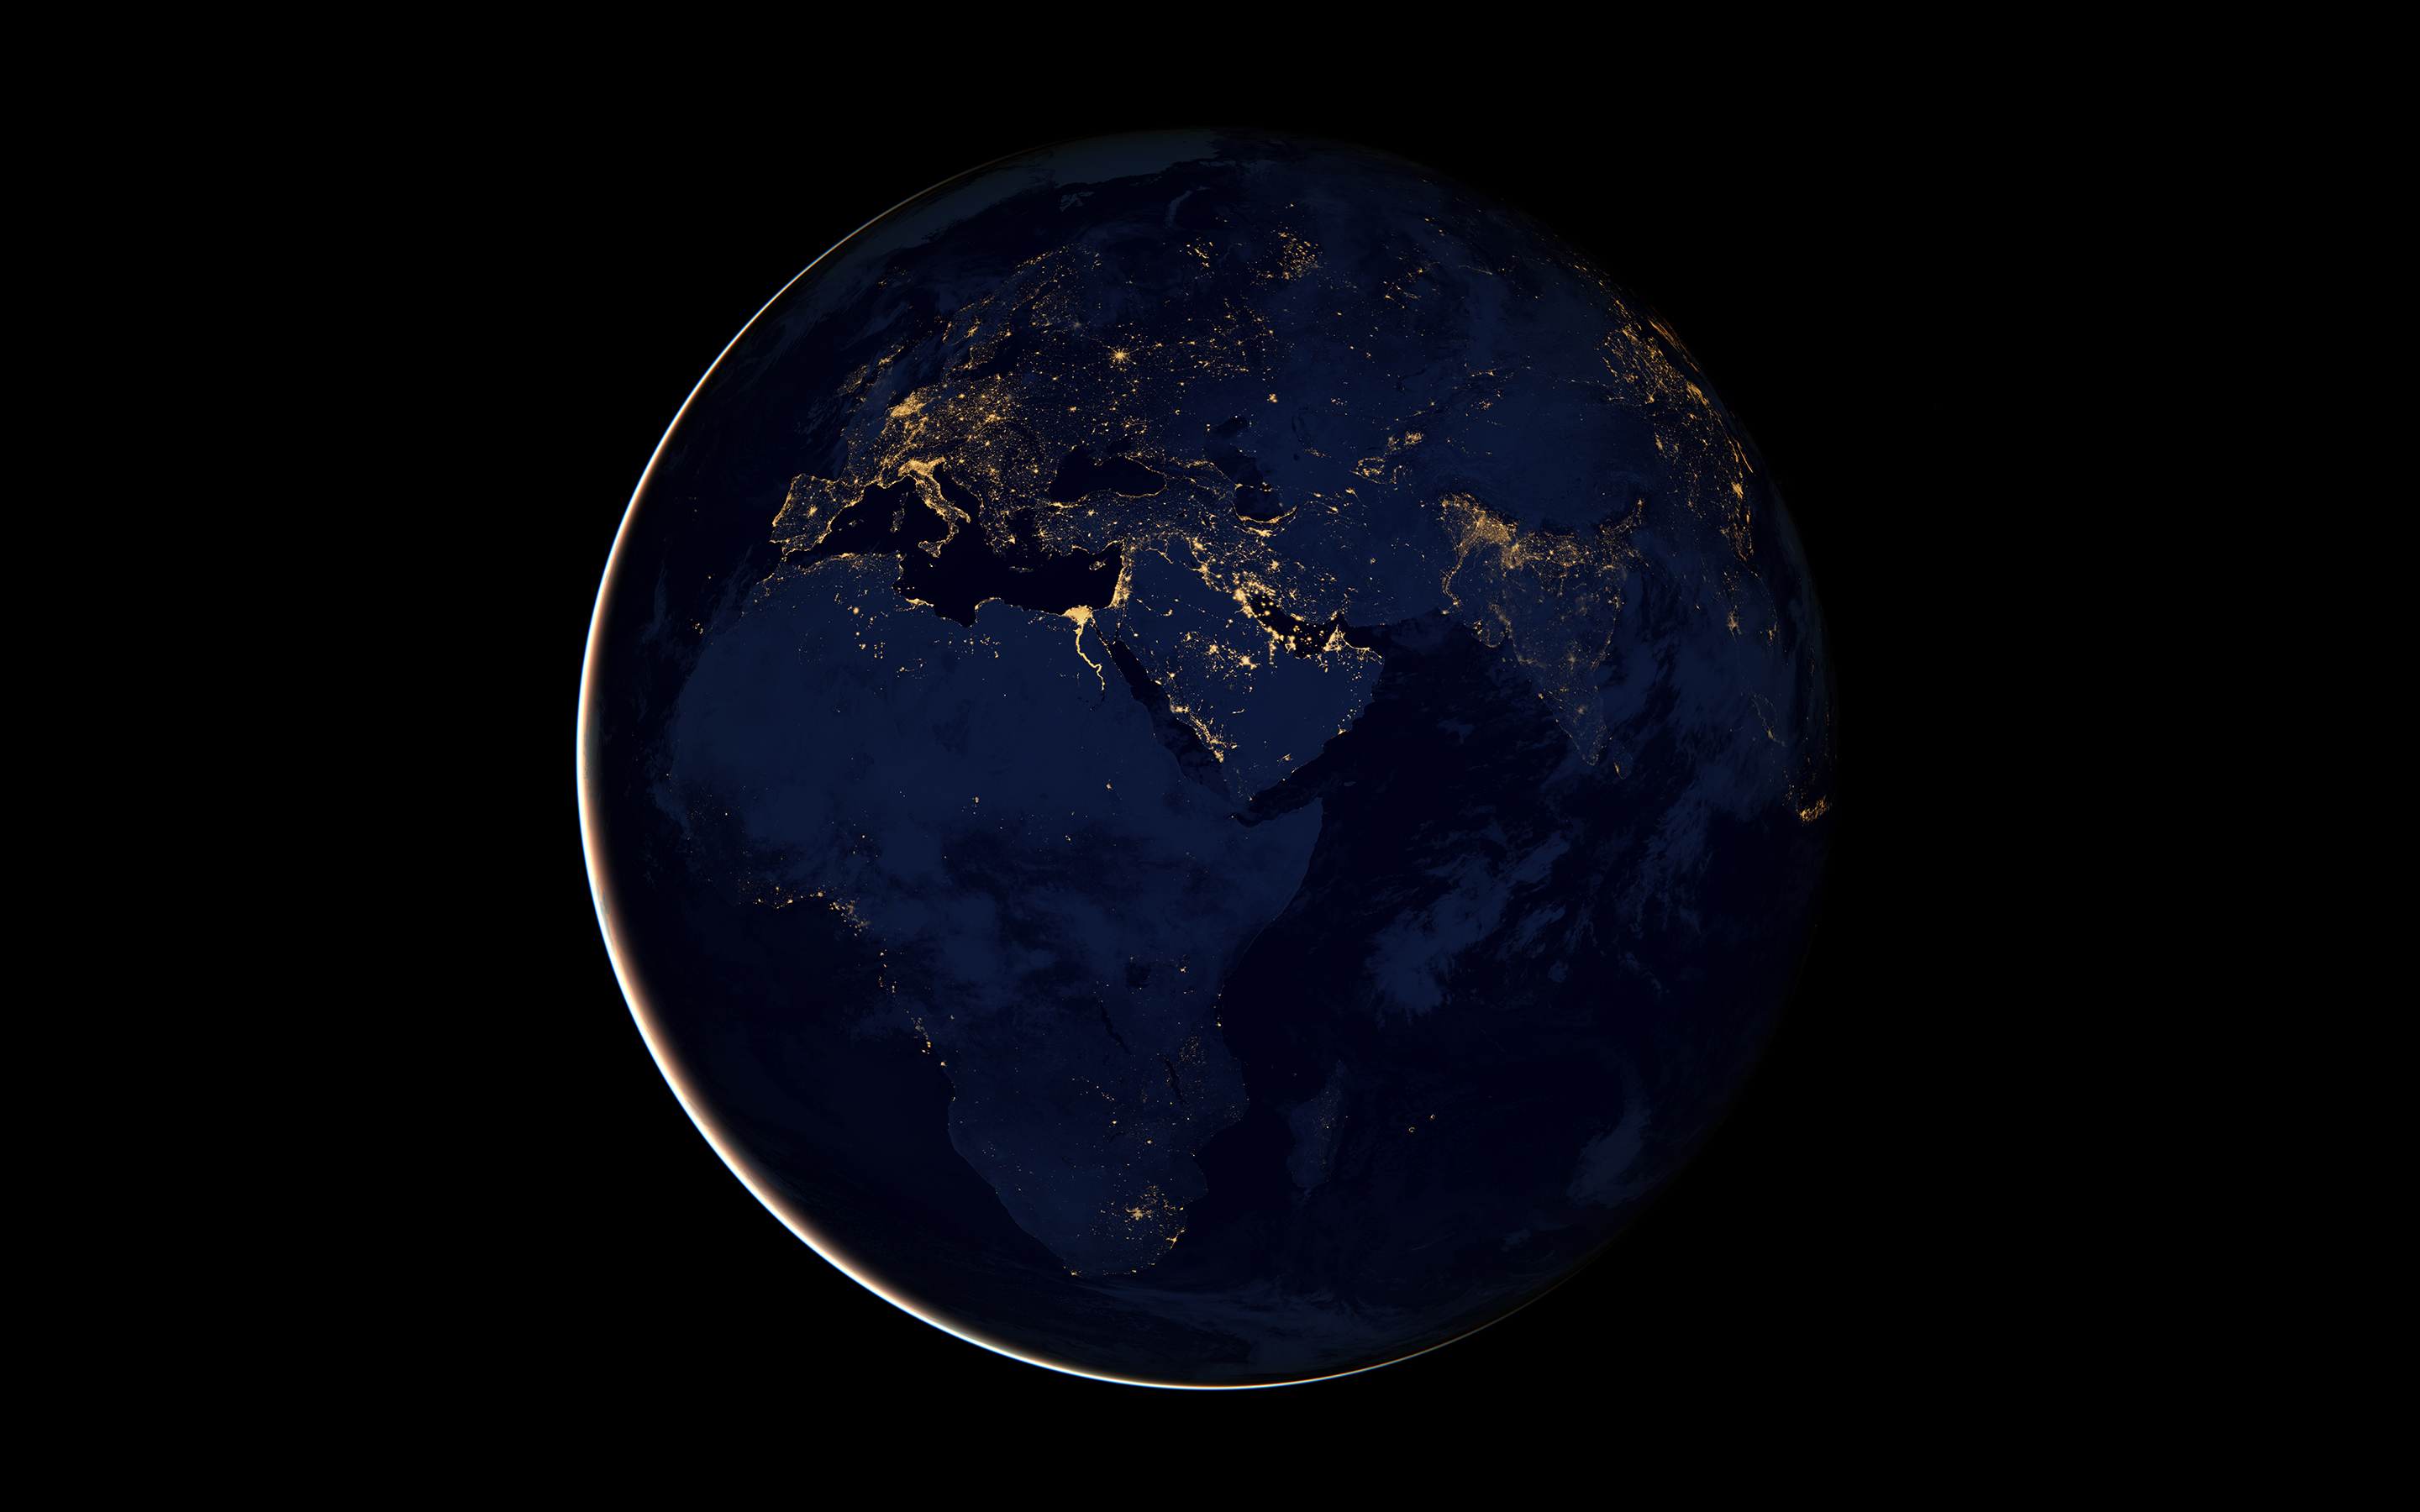 sci fi, Space, Planets, Earth, From space, Landscapes, Land, Ocean, Lights, Population, World, Photography, Nasa Wallpaper